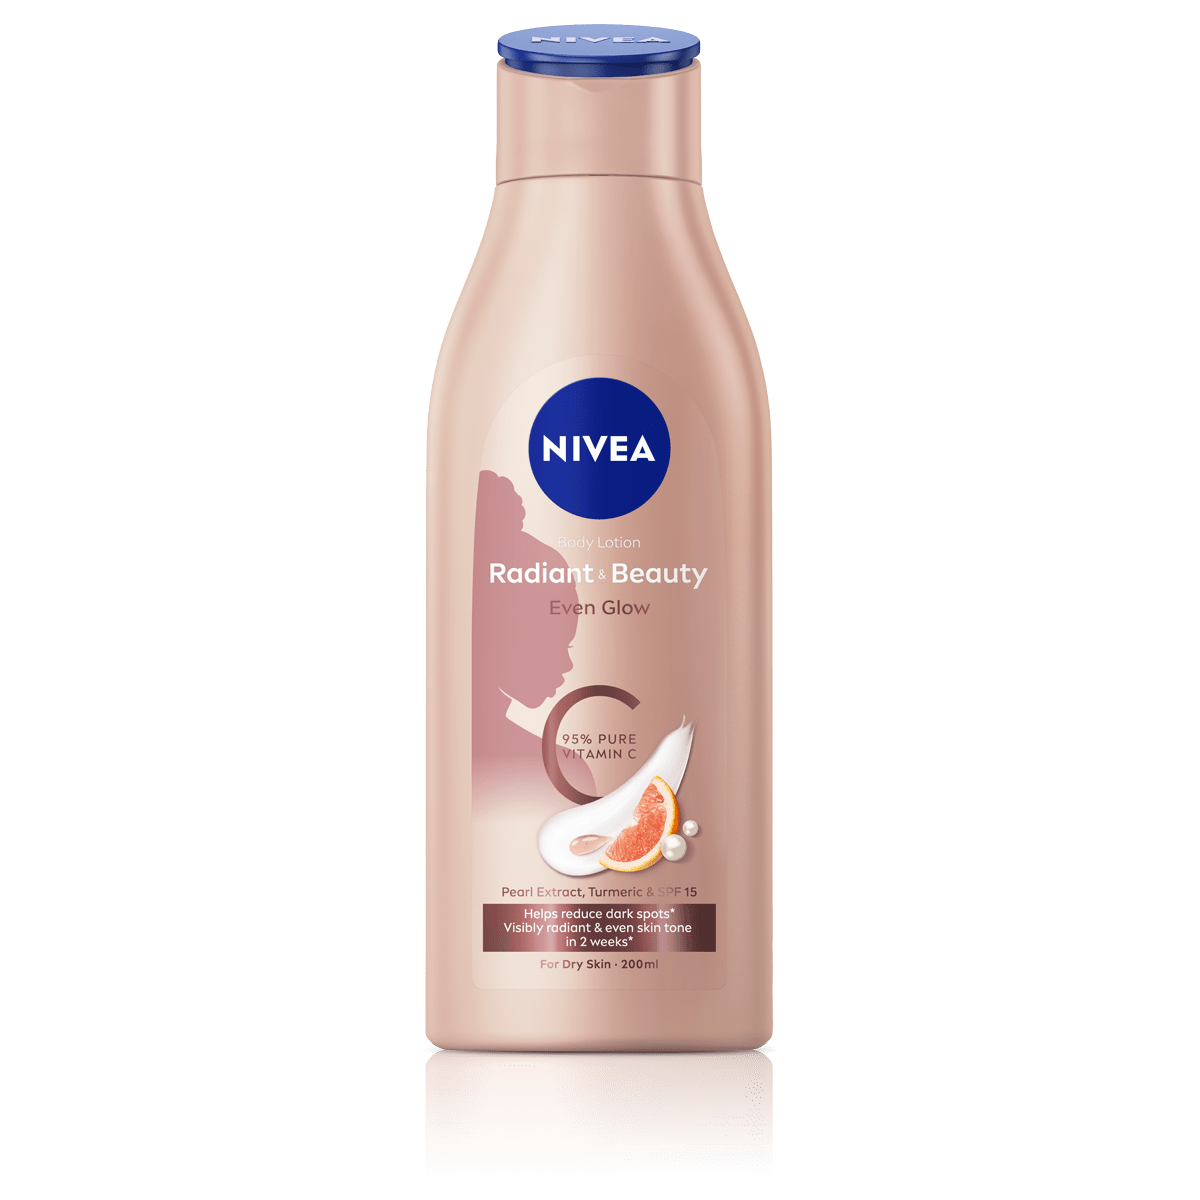 NIVEA RADIANT AND BEAUTY EVEN GLOW